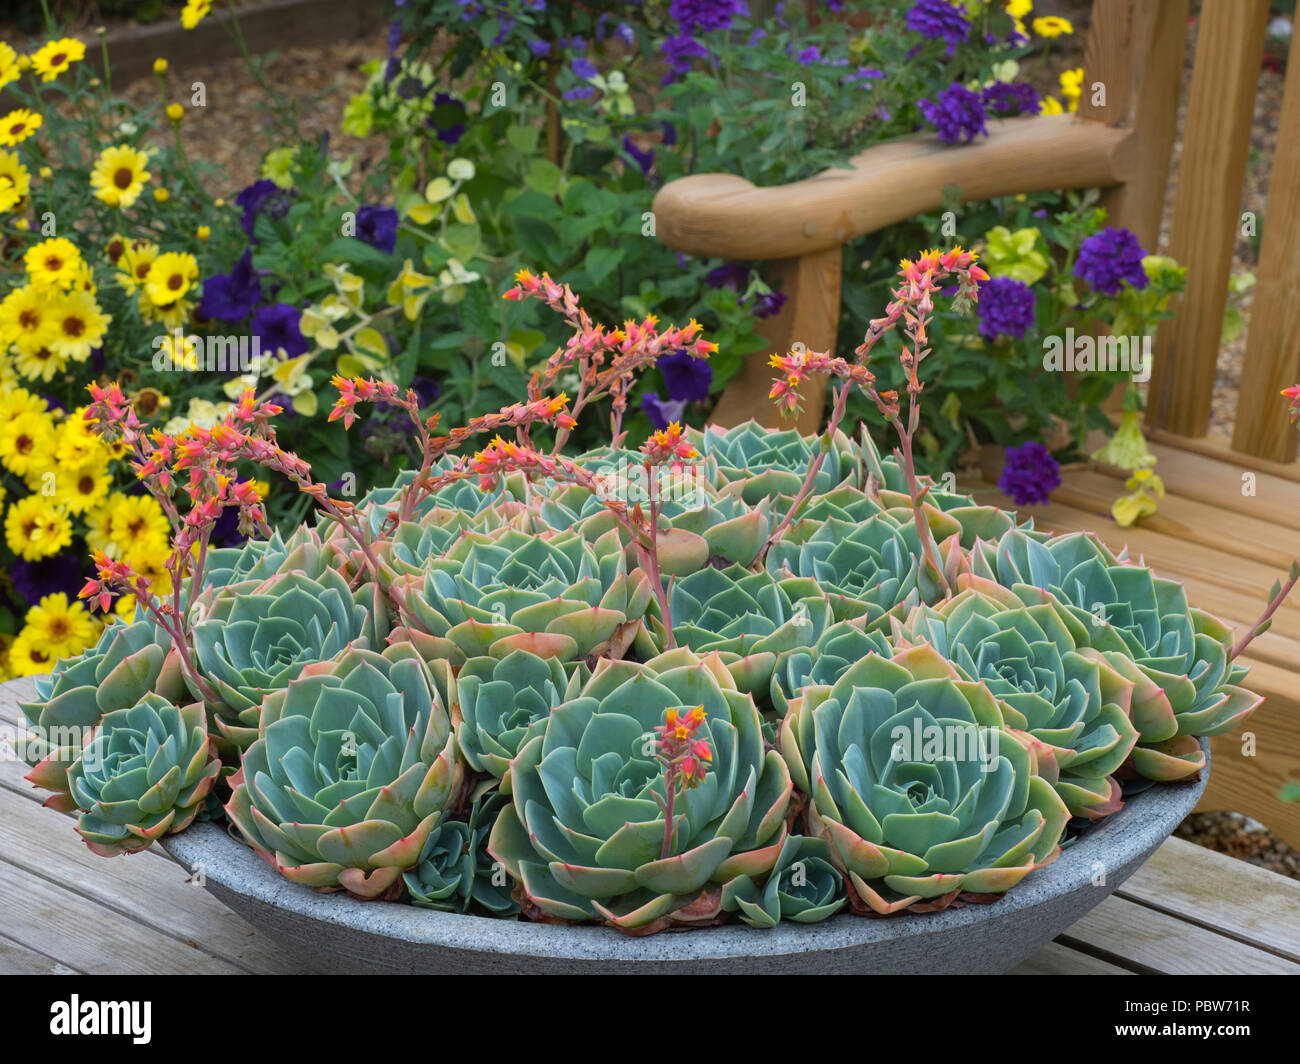 Old Hens and Chicks, Hens and Chicks, Blue Echeveria, Glaucous Echeveria in flower Stock Photo